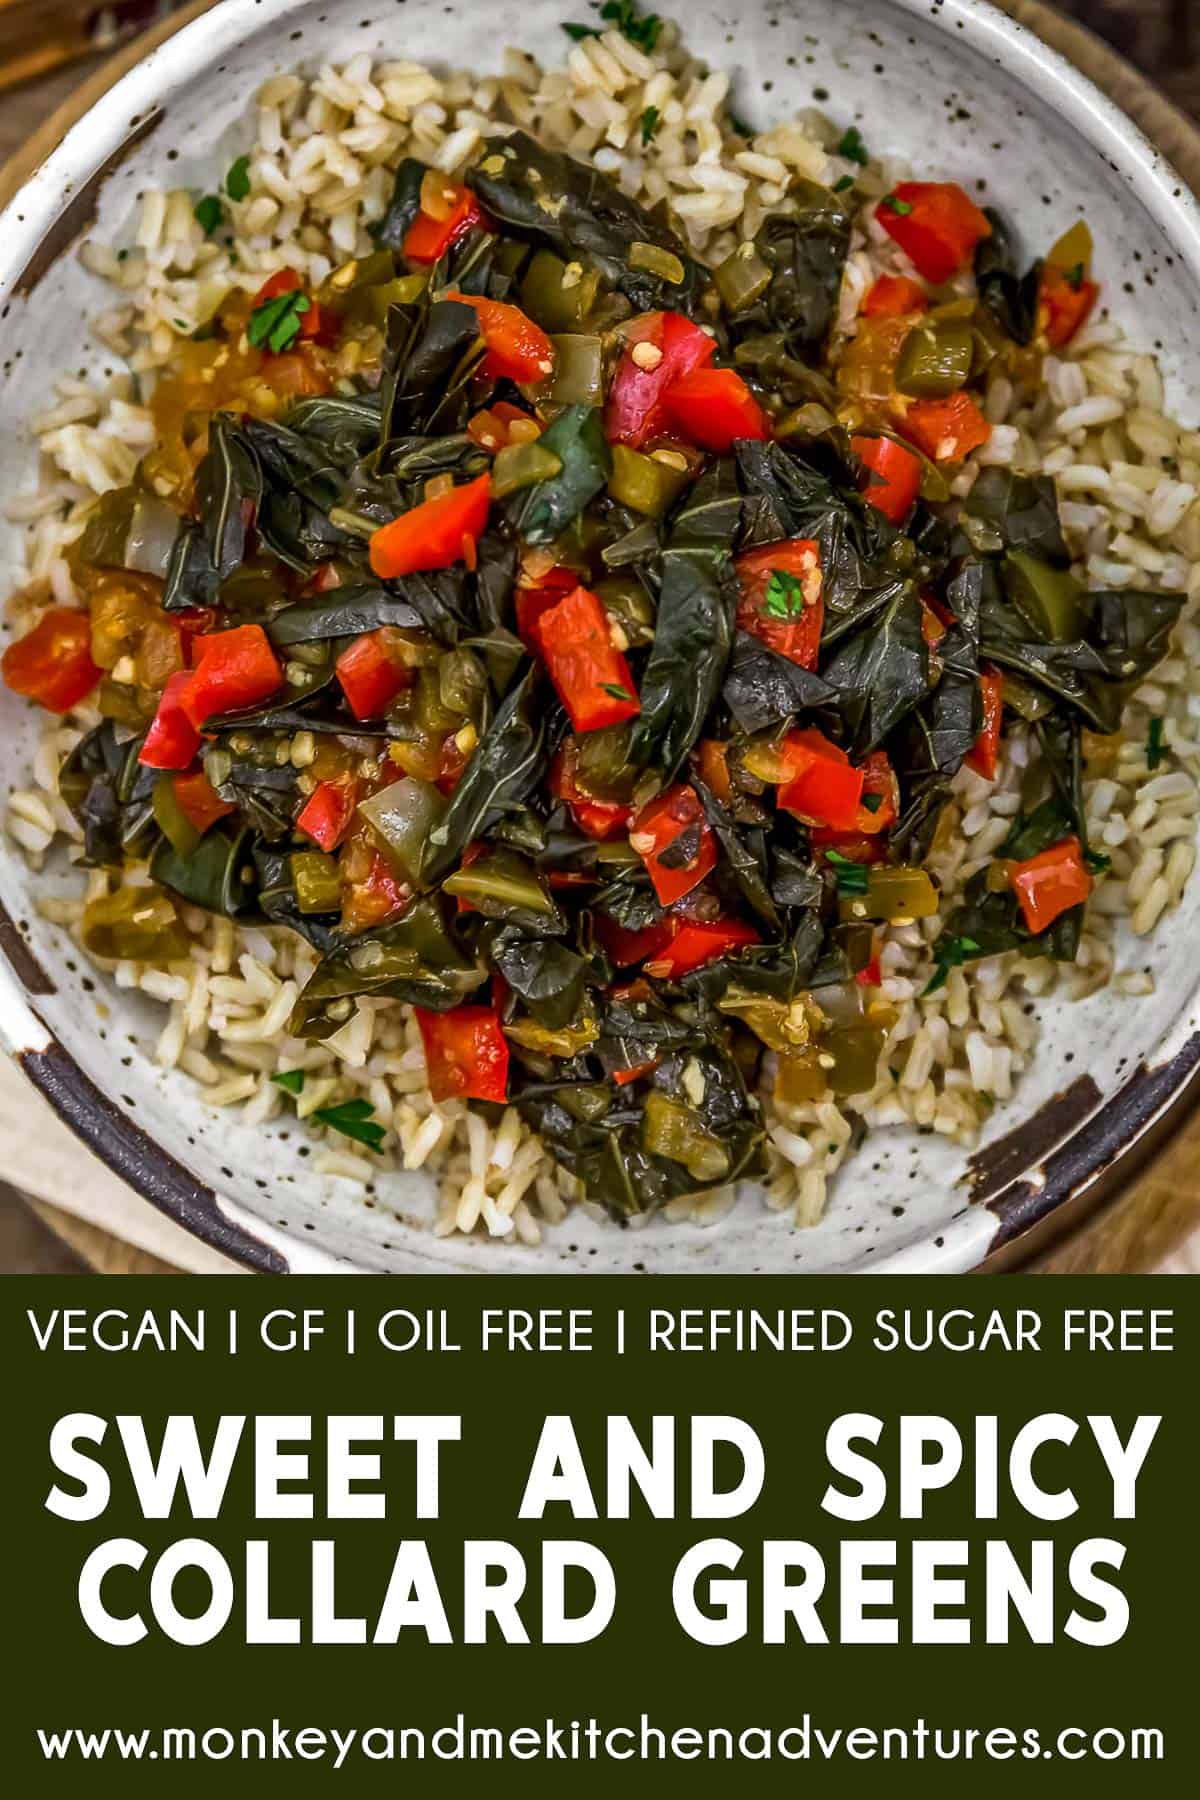 Sweet and Spicy Collard Greens with text description